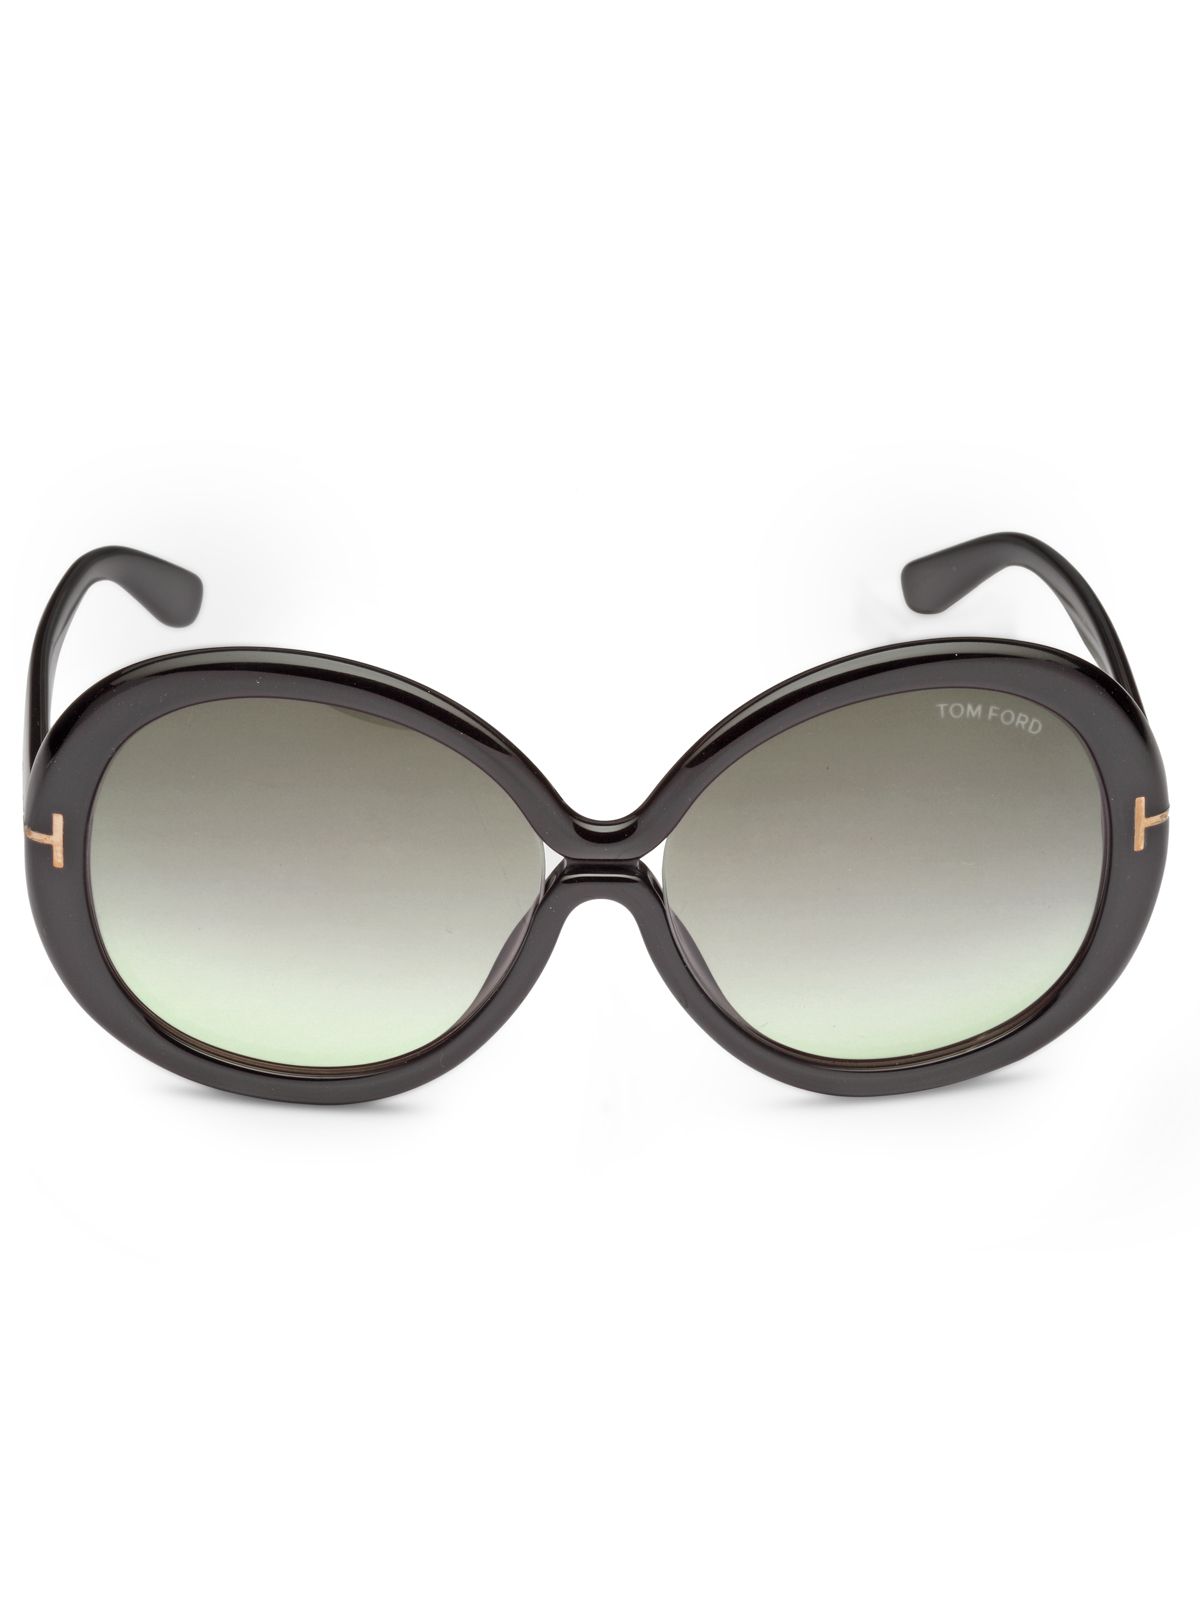 Tom Ford Grey Oversized Sunglasses ( GISELLA 388 01B|58 ) - Buy Tom Ford  Grey Oversized Sunglasses ( GISELLA 388 01B|58 ) Online at Low Price -  Snapdeal